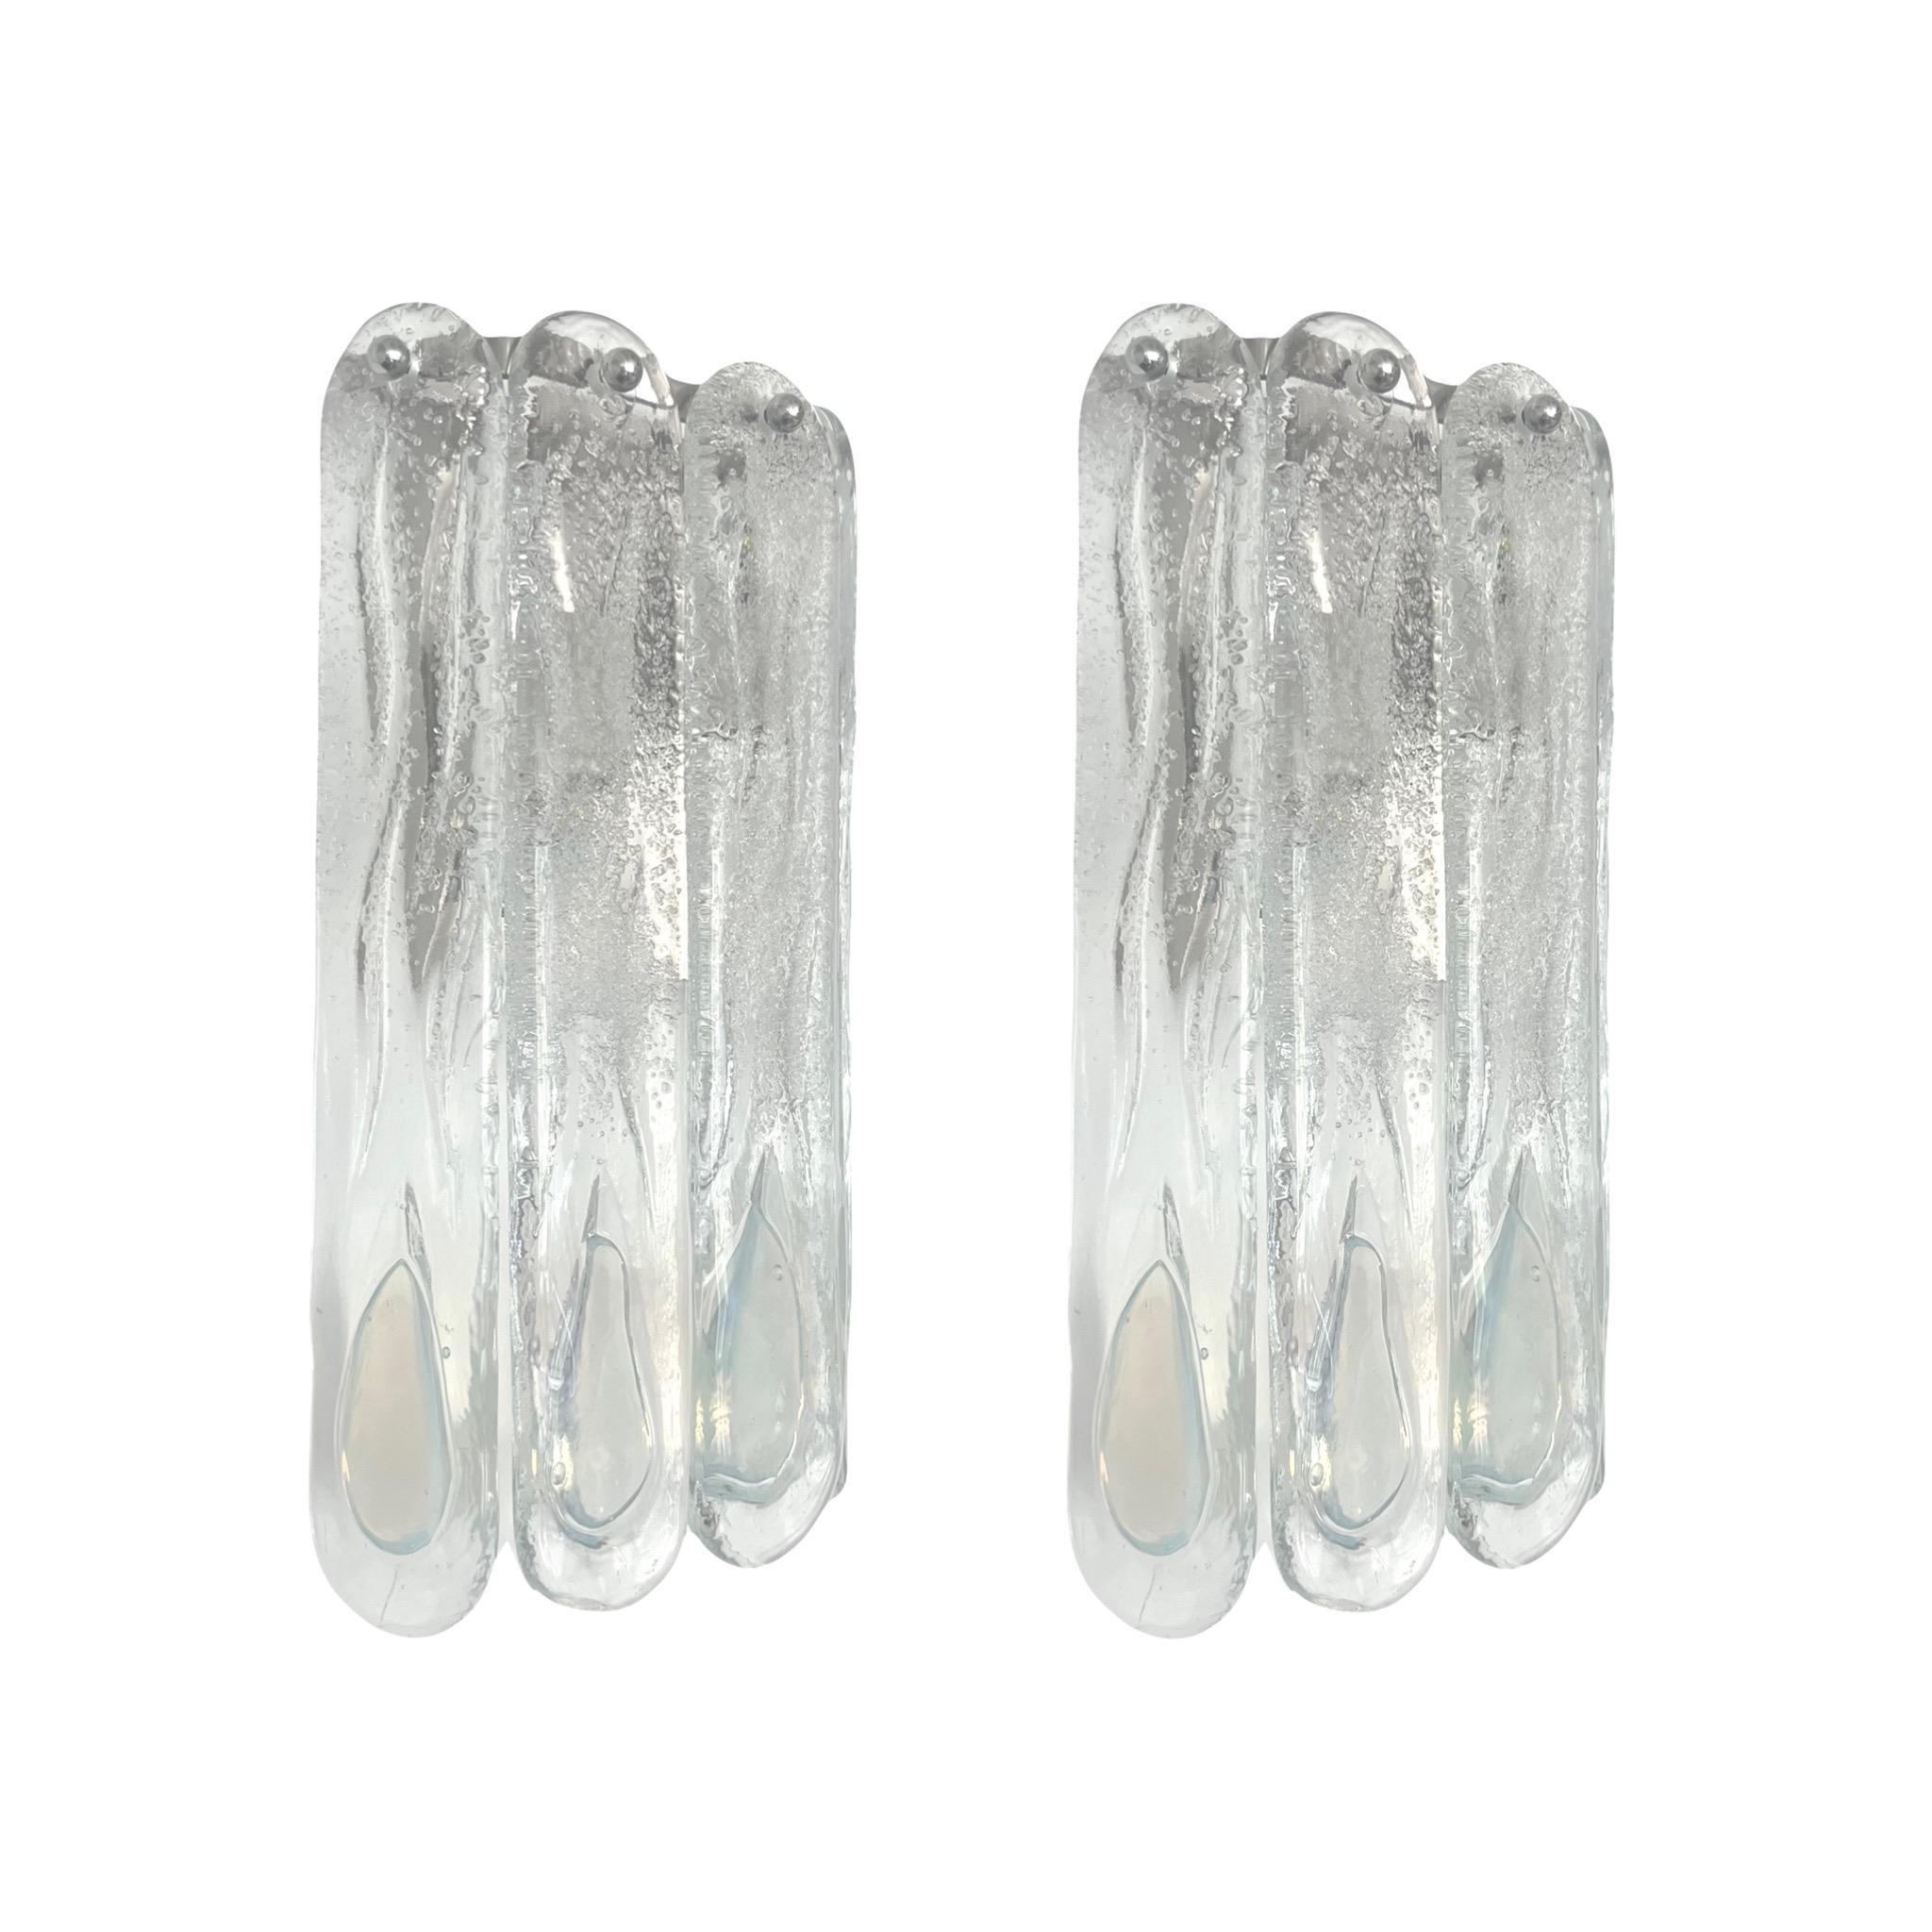 Stunning and beauty Set of Three Italian Iridescente White Clear Murano glass Wall Sconces. These fixtures were designed and manufactured during the 1970s in Italy by Mazzega.
Mazzega lie in the noble Venetian glassworking tradition; the firm was